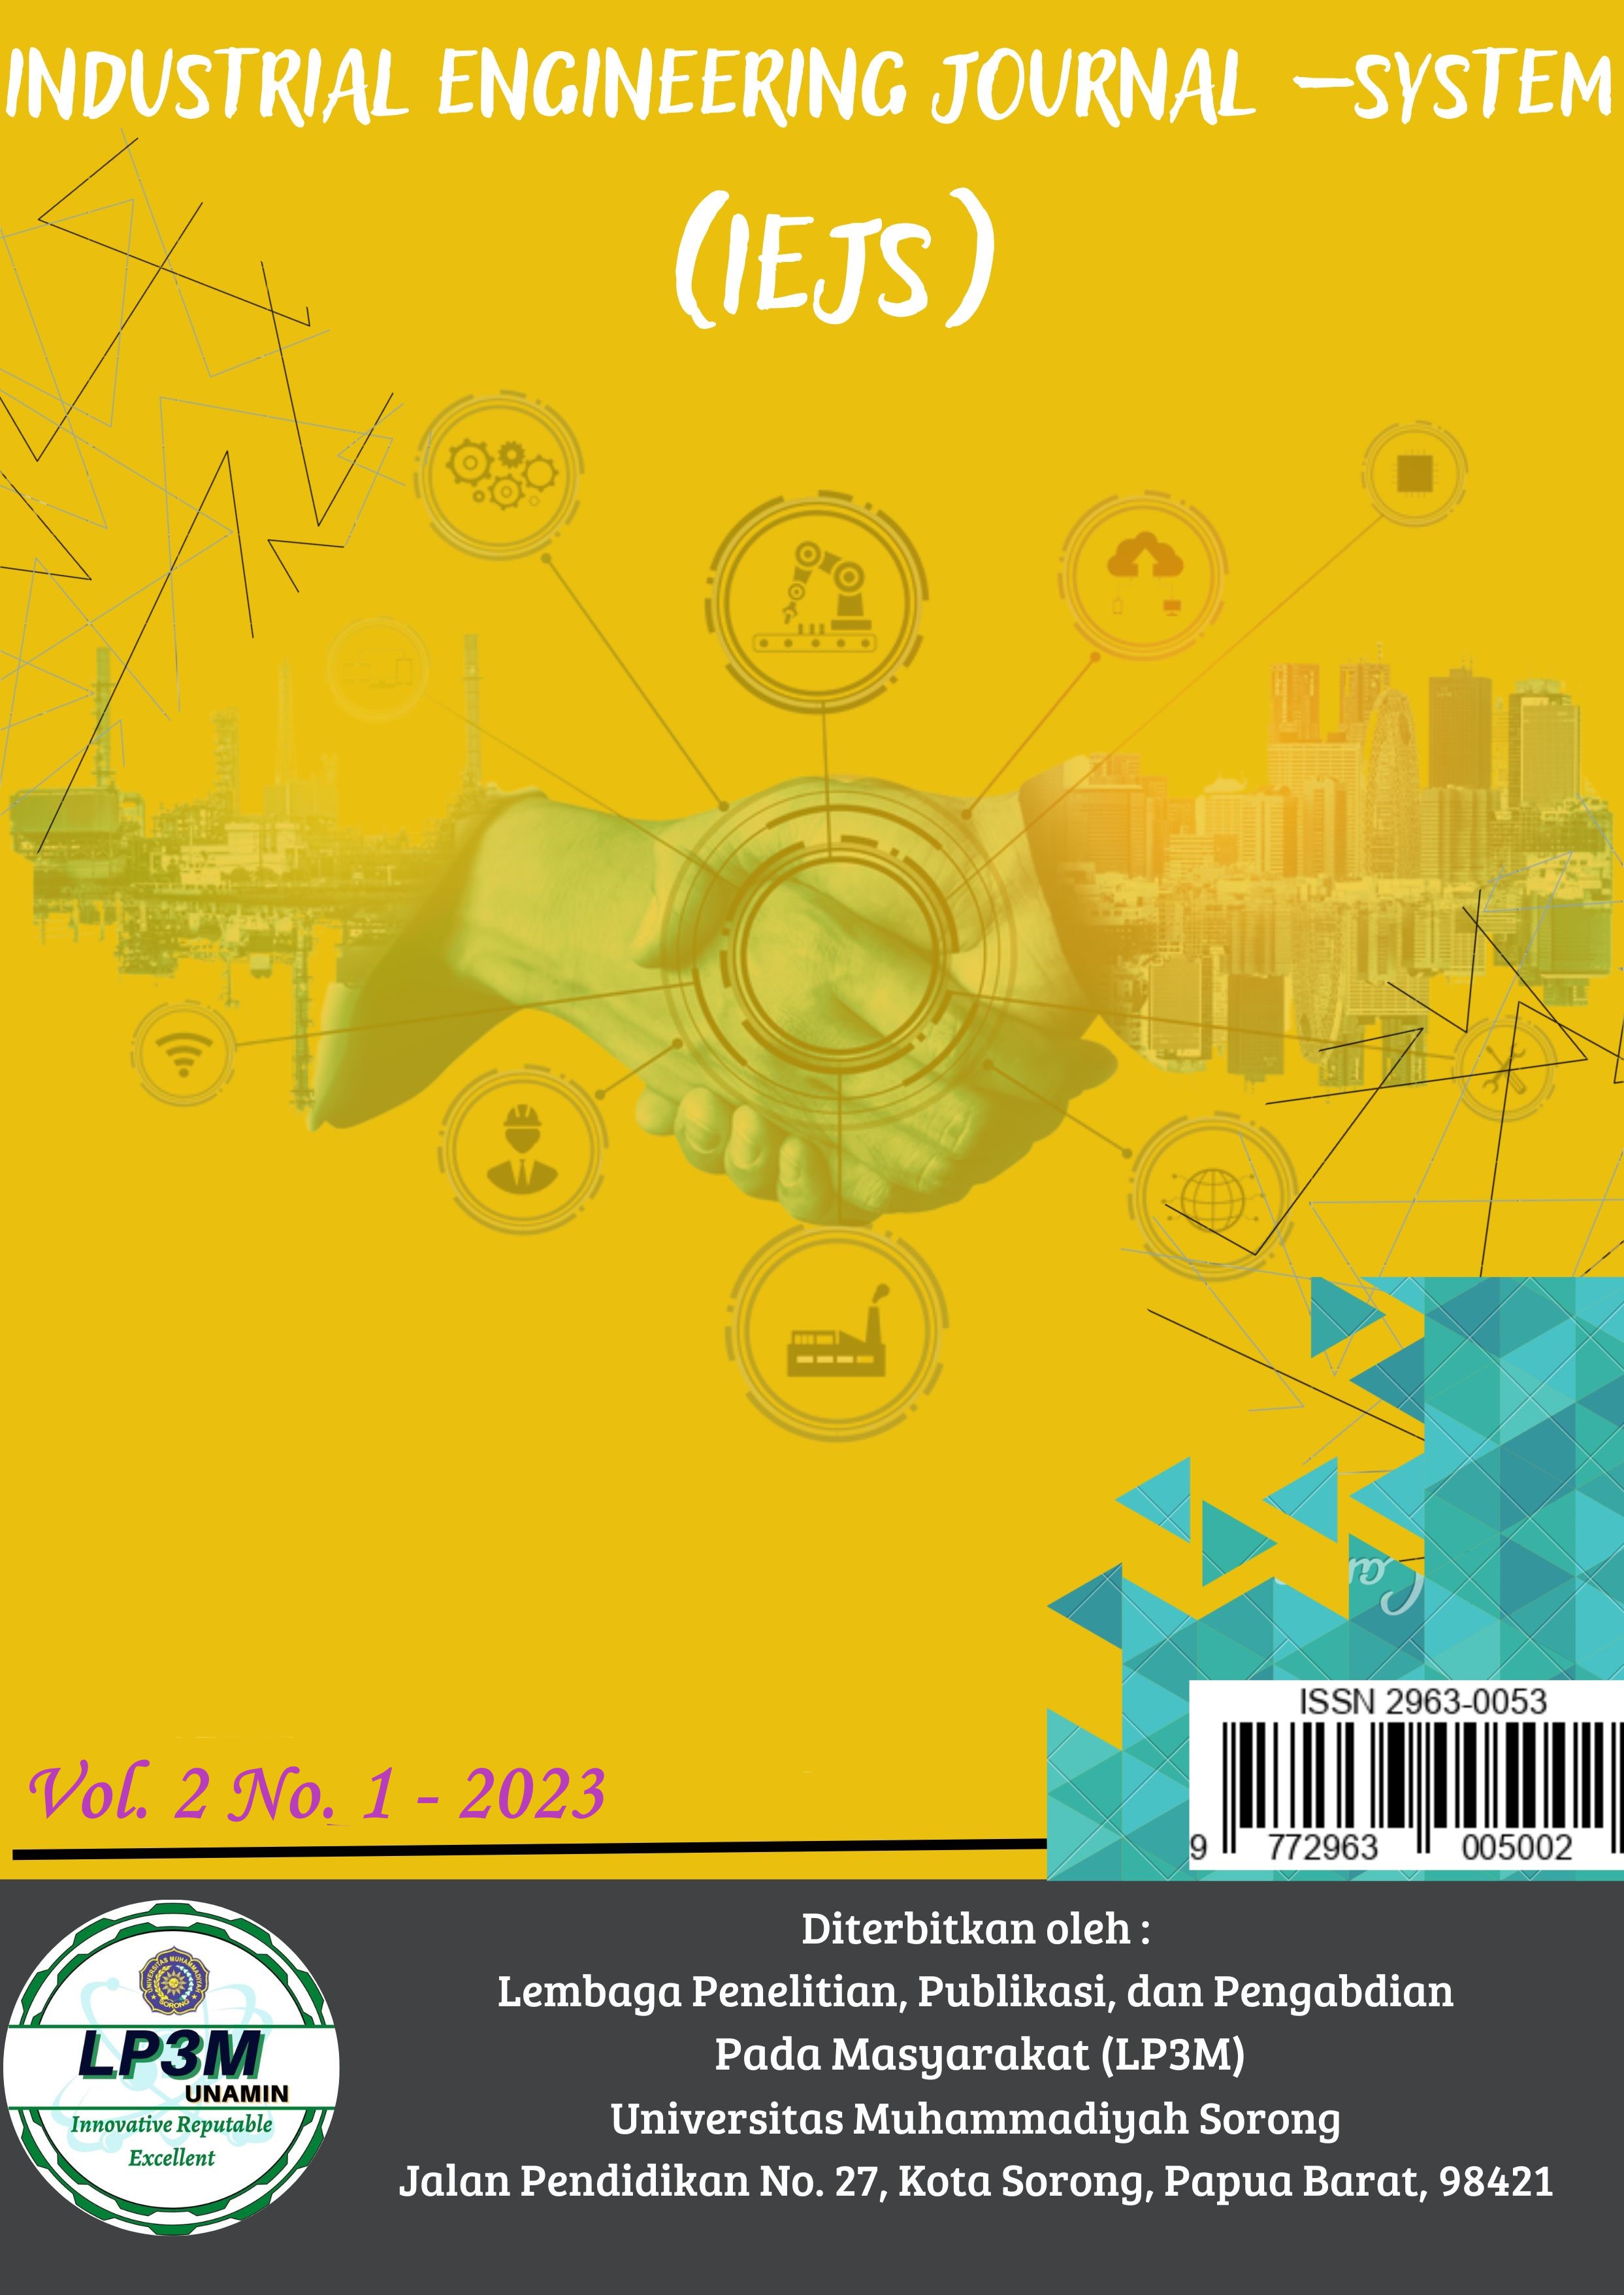 					View Vol. 2 No. 01 (2023): Industrial Engineering Journal – System
				